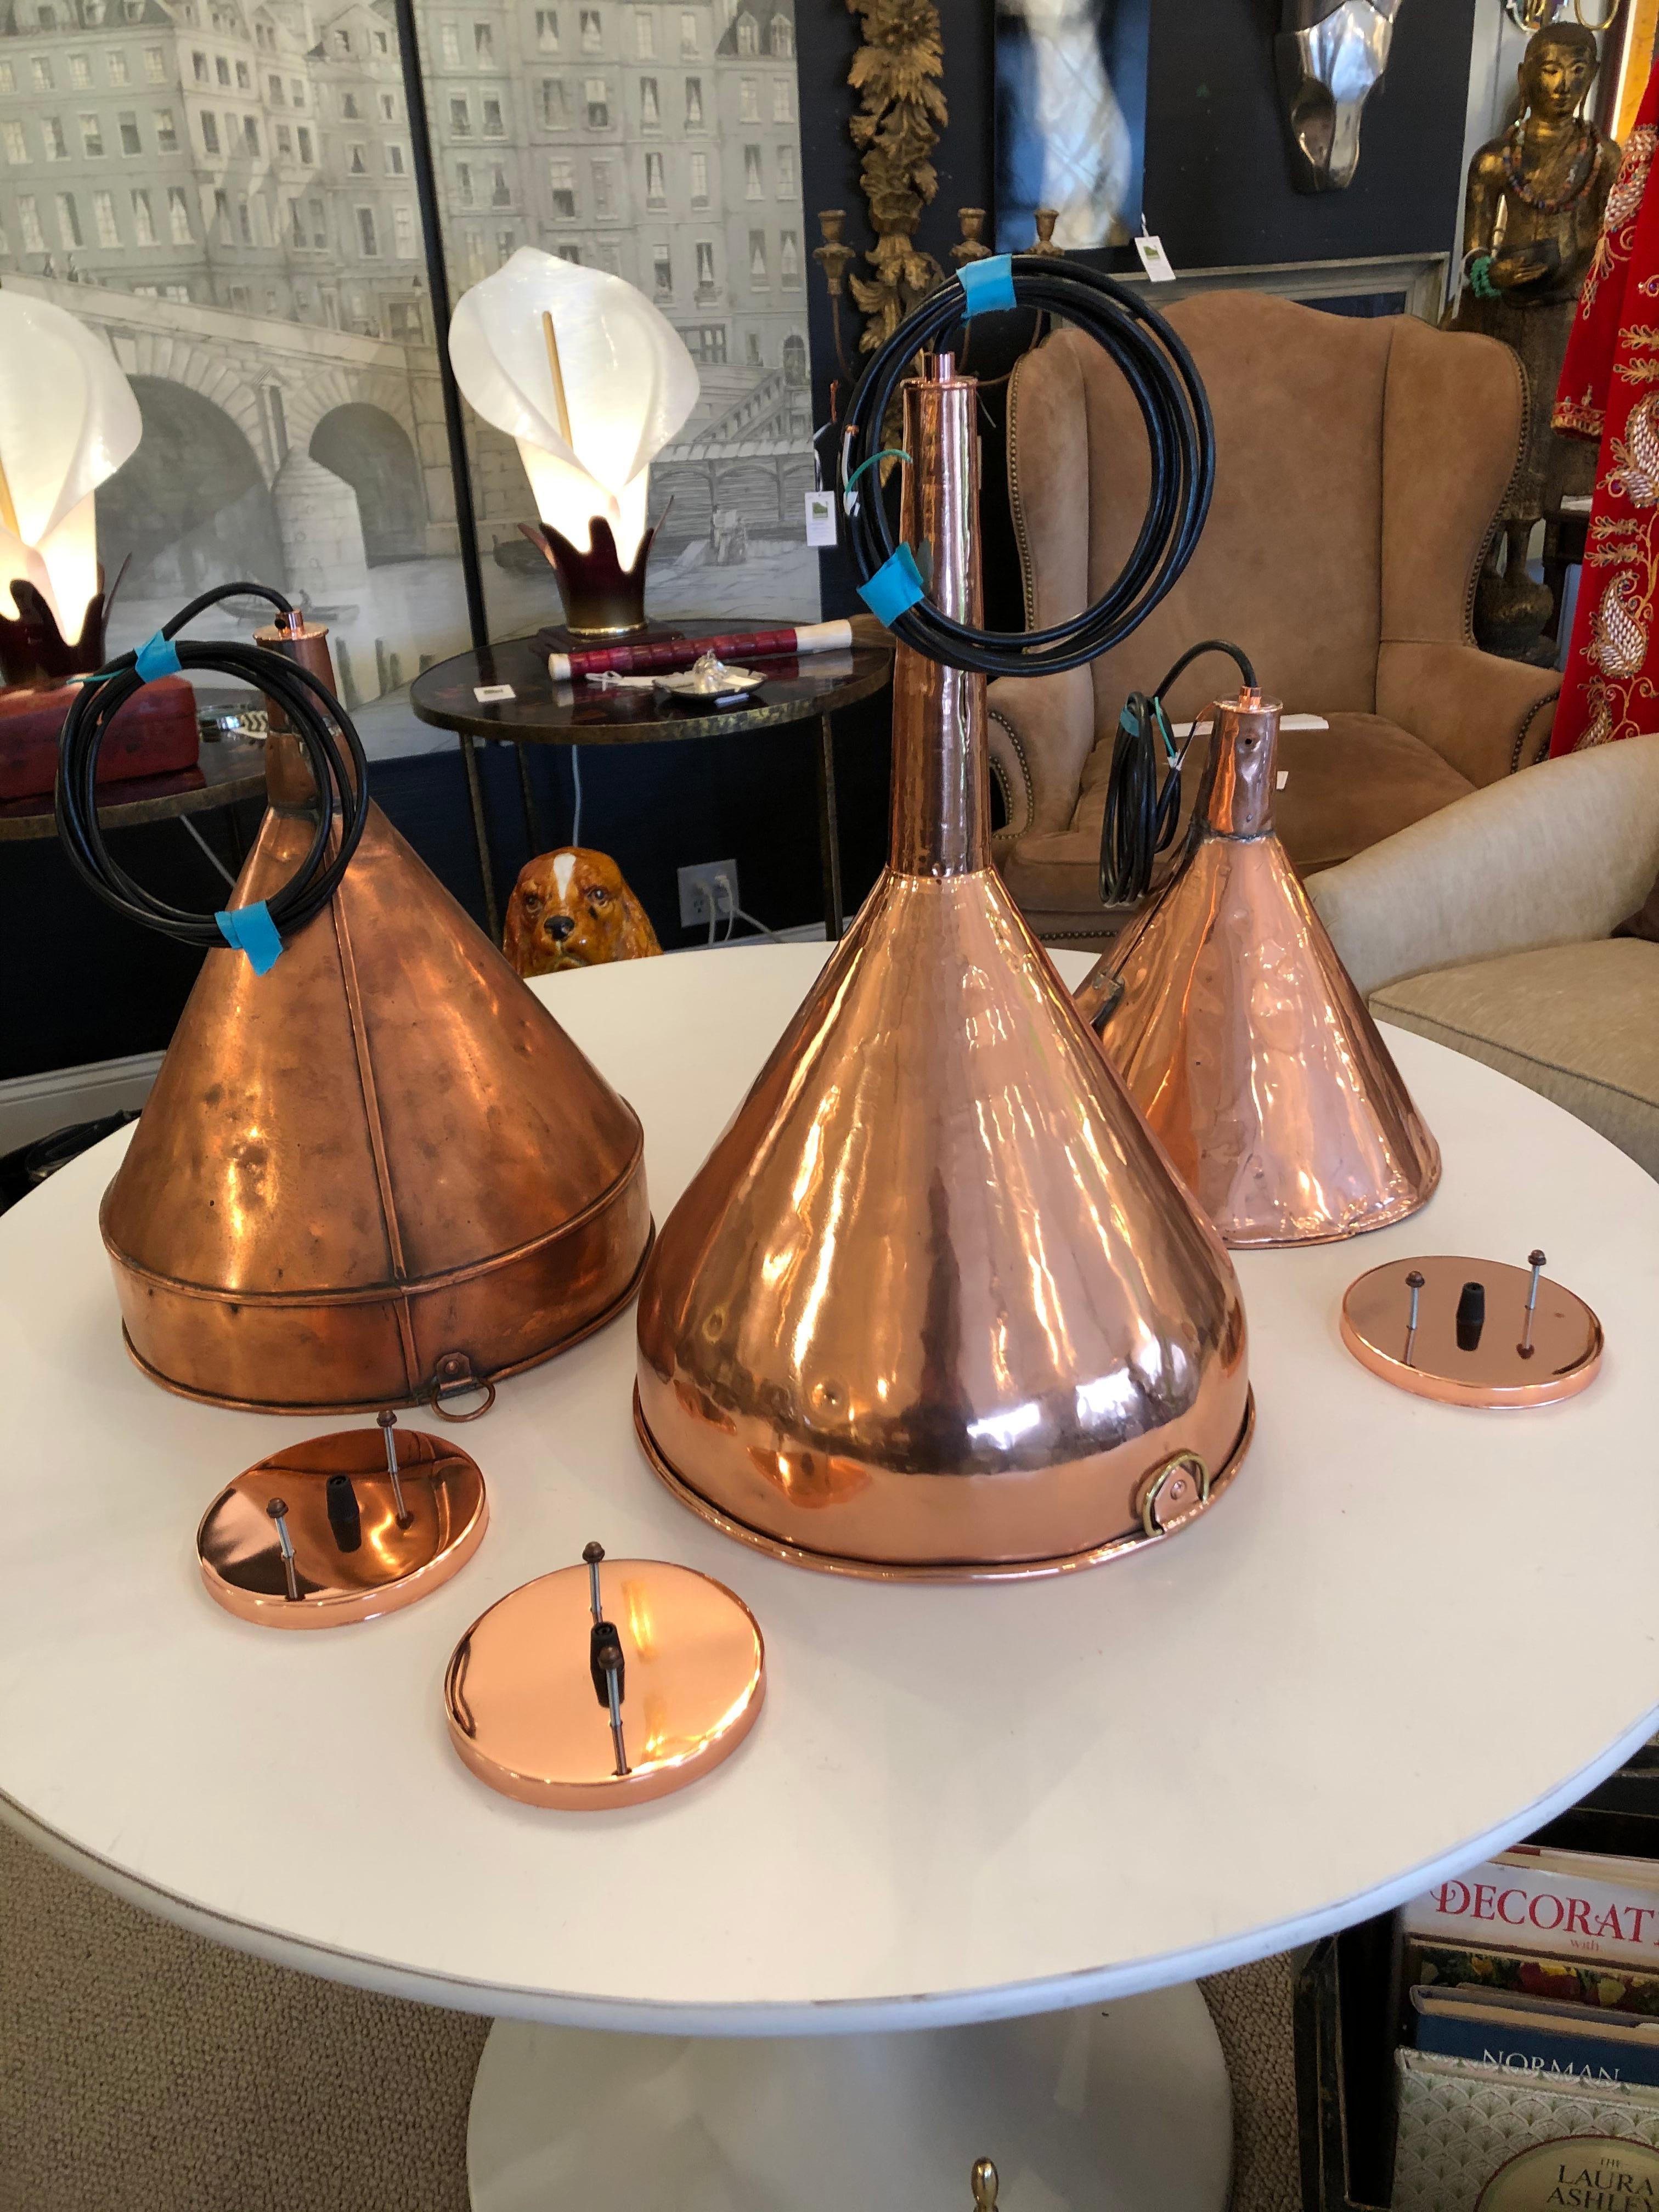 Marvelous trio of varied antique copper funnels cleverly electrified and transformed into light pendants.
Each takes 60 watt bulb.
Measures: Large: 20.75 height, 12.5 diameter
Medium: 16.5 height, 12.25 diameter
Small: 12.5 height, 13.5